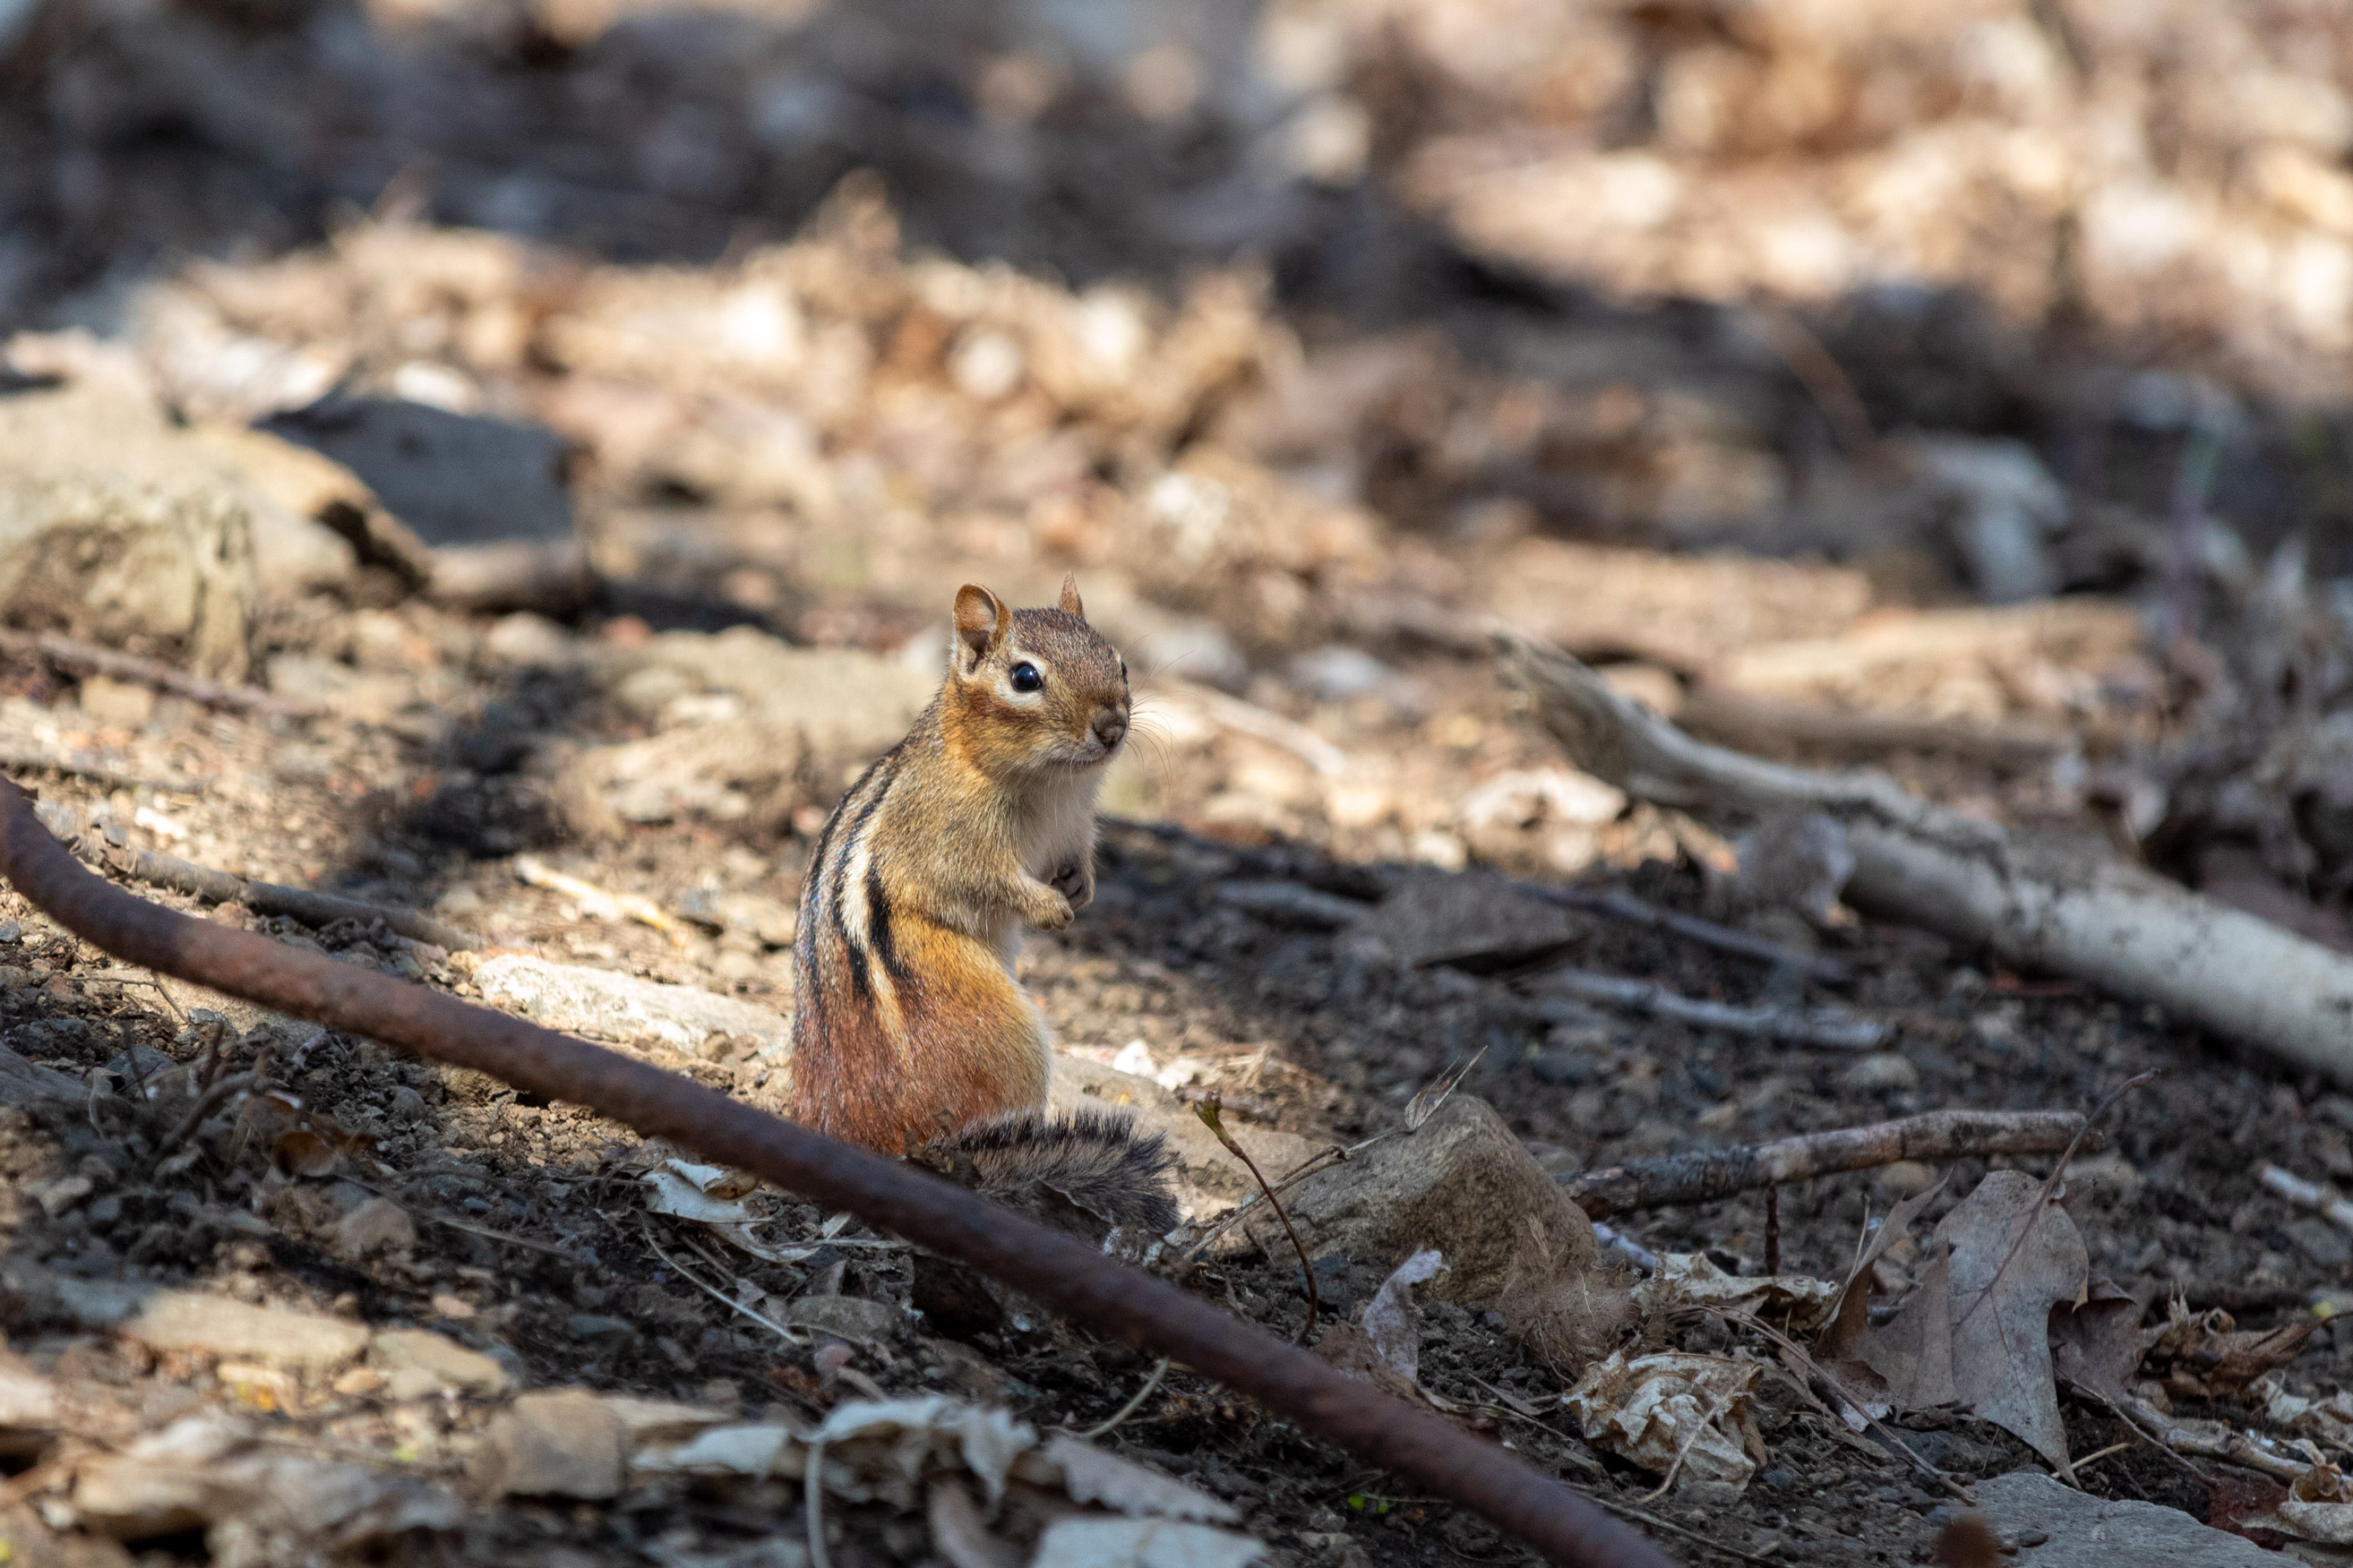 Chipmunk standing on the forest floor, twisting to look at the camera